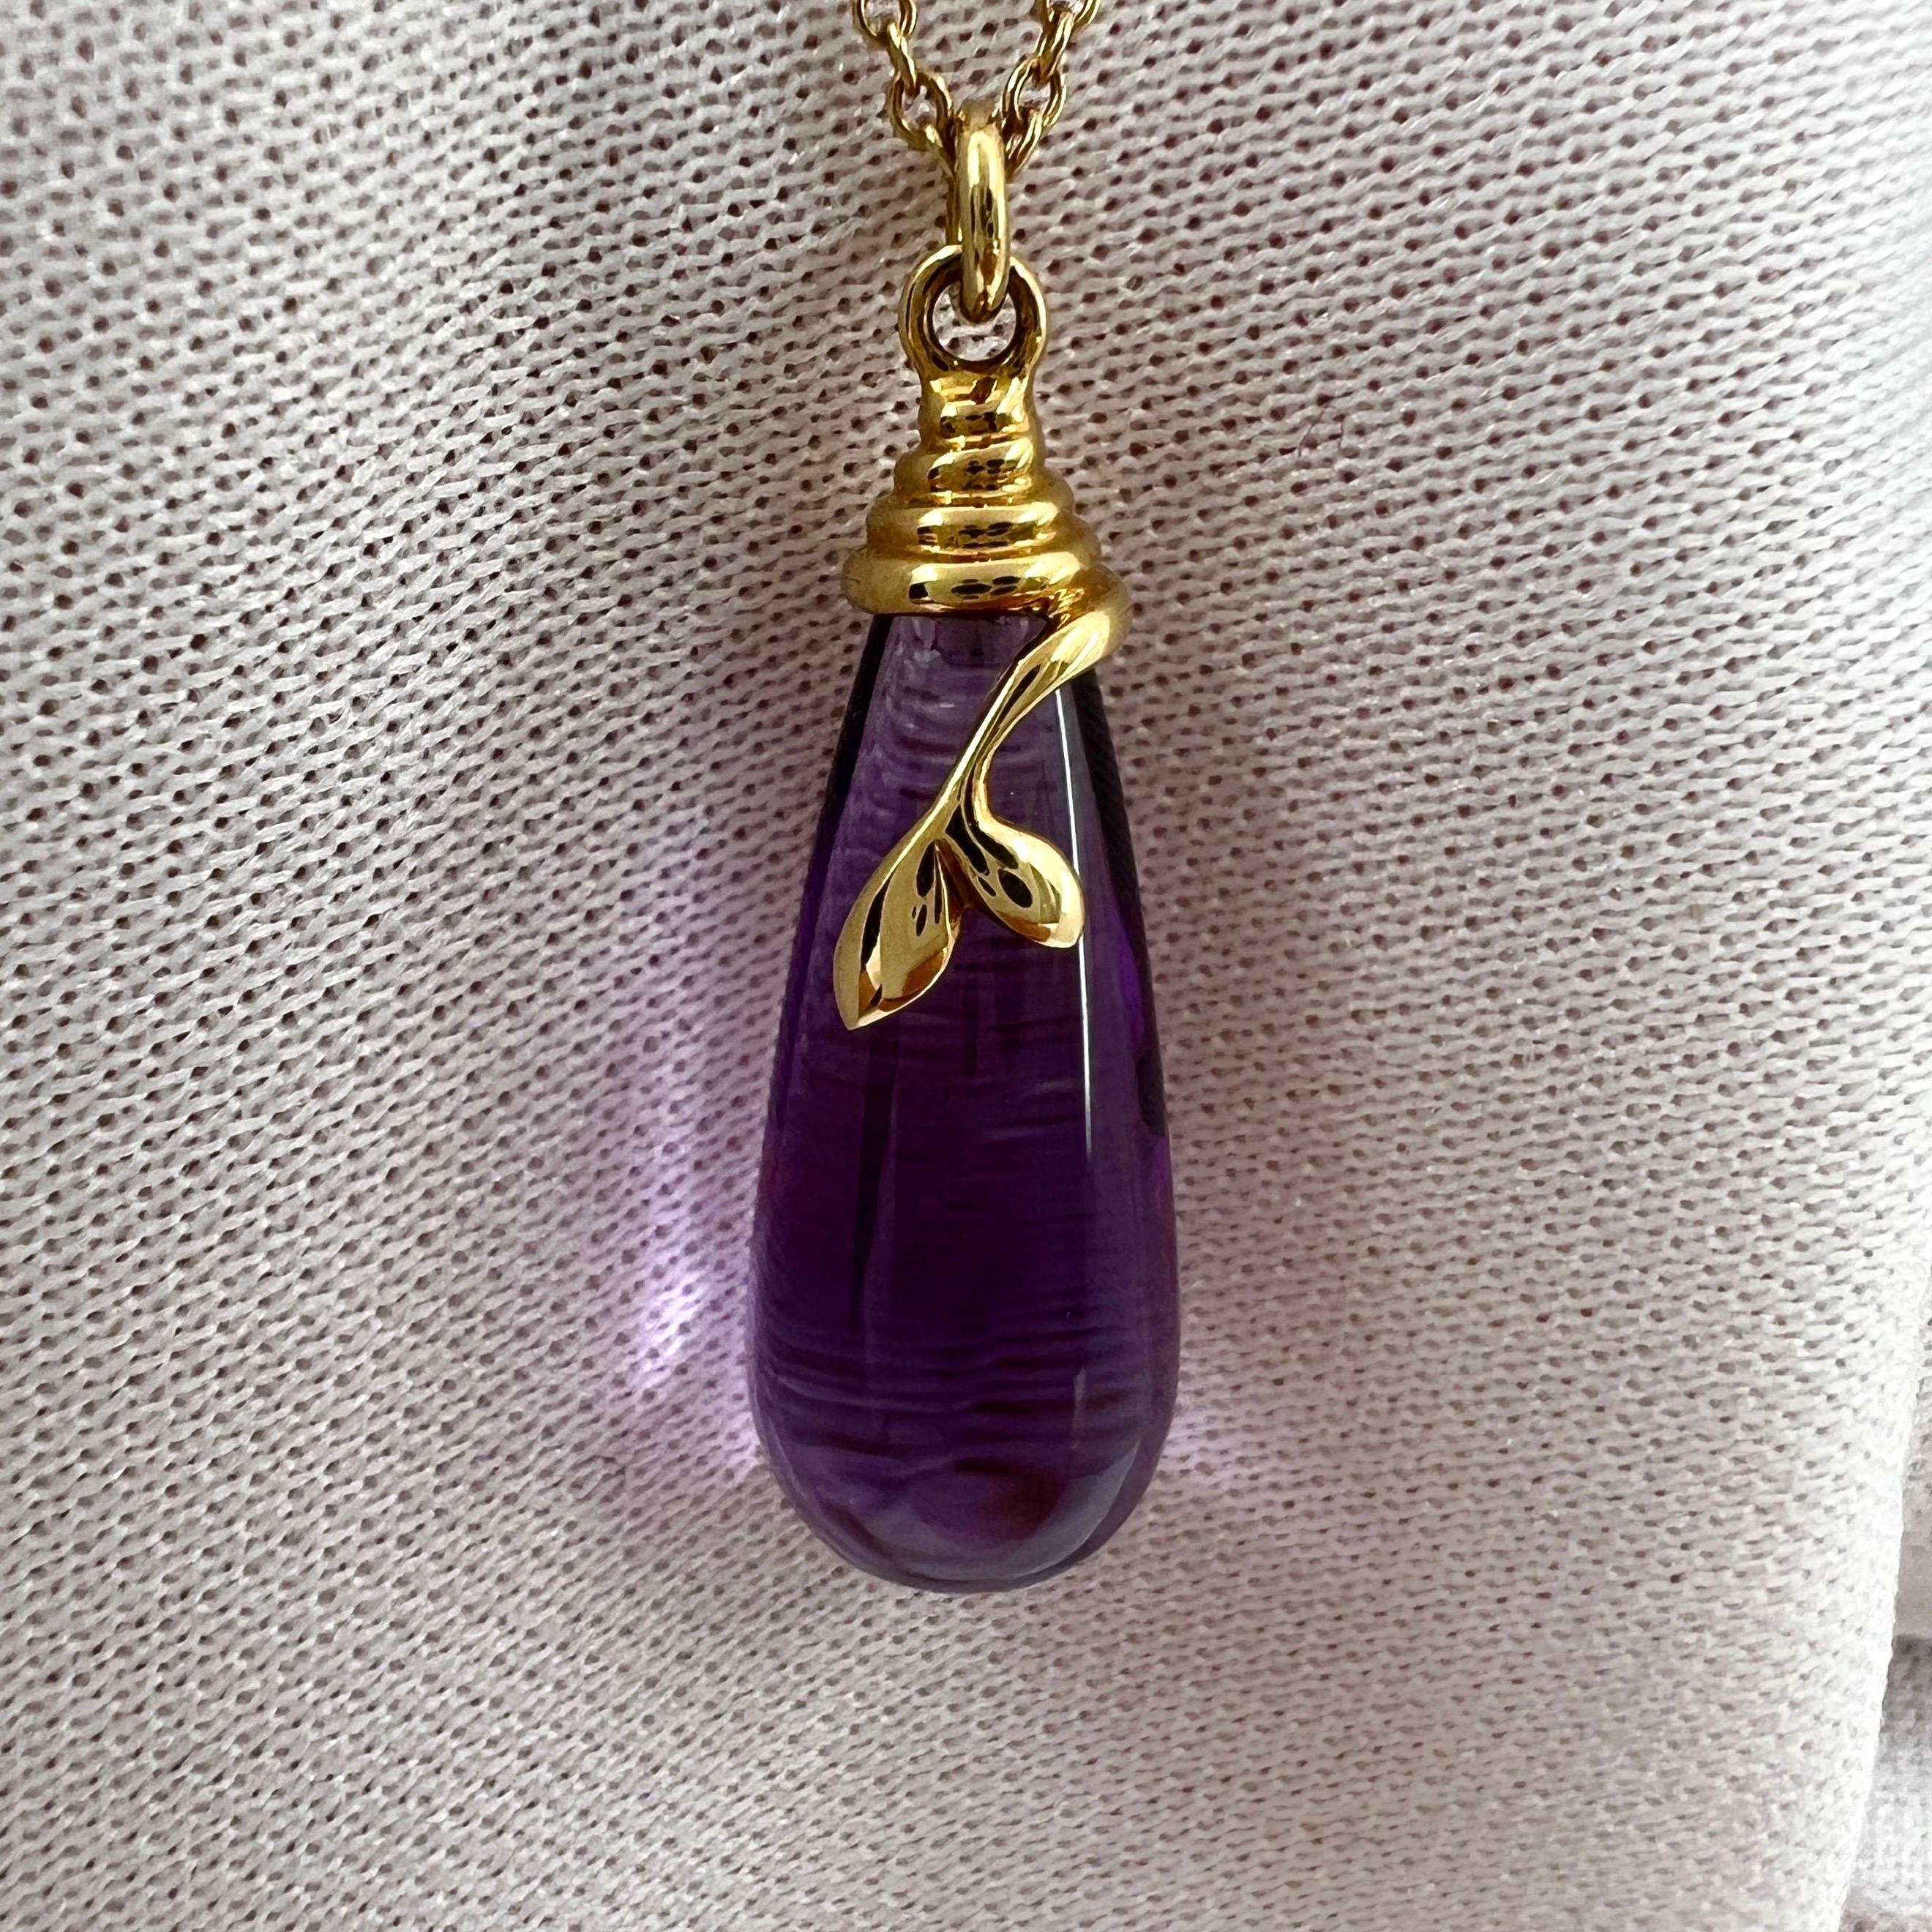 Rare Tiffany & Co. Paloma Picasso Olive Leaf Amethyst Gold Drop Pendant Necklace For Sale 5